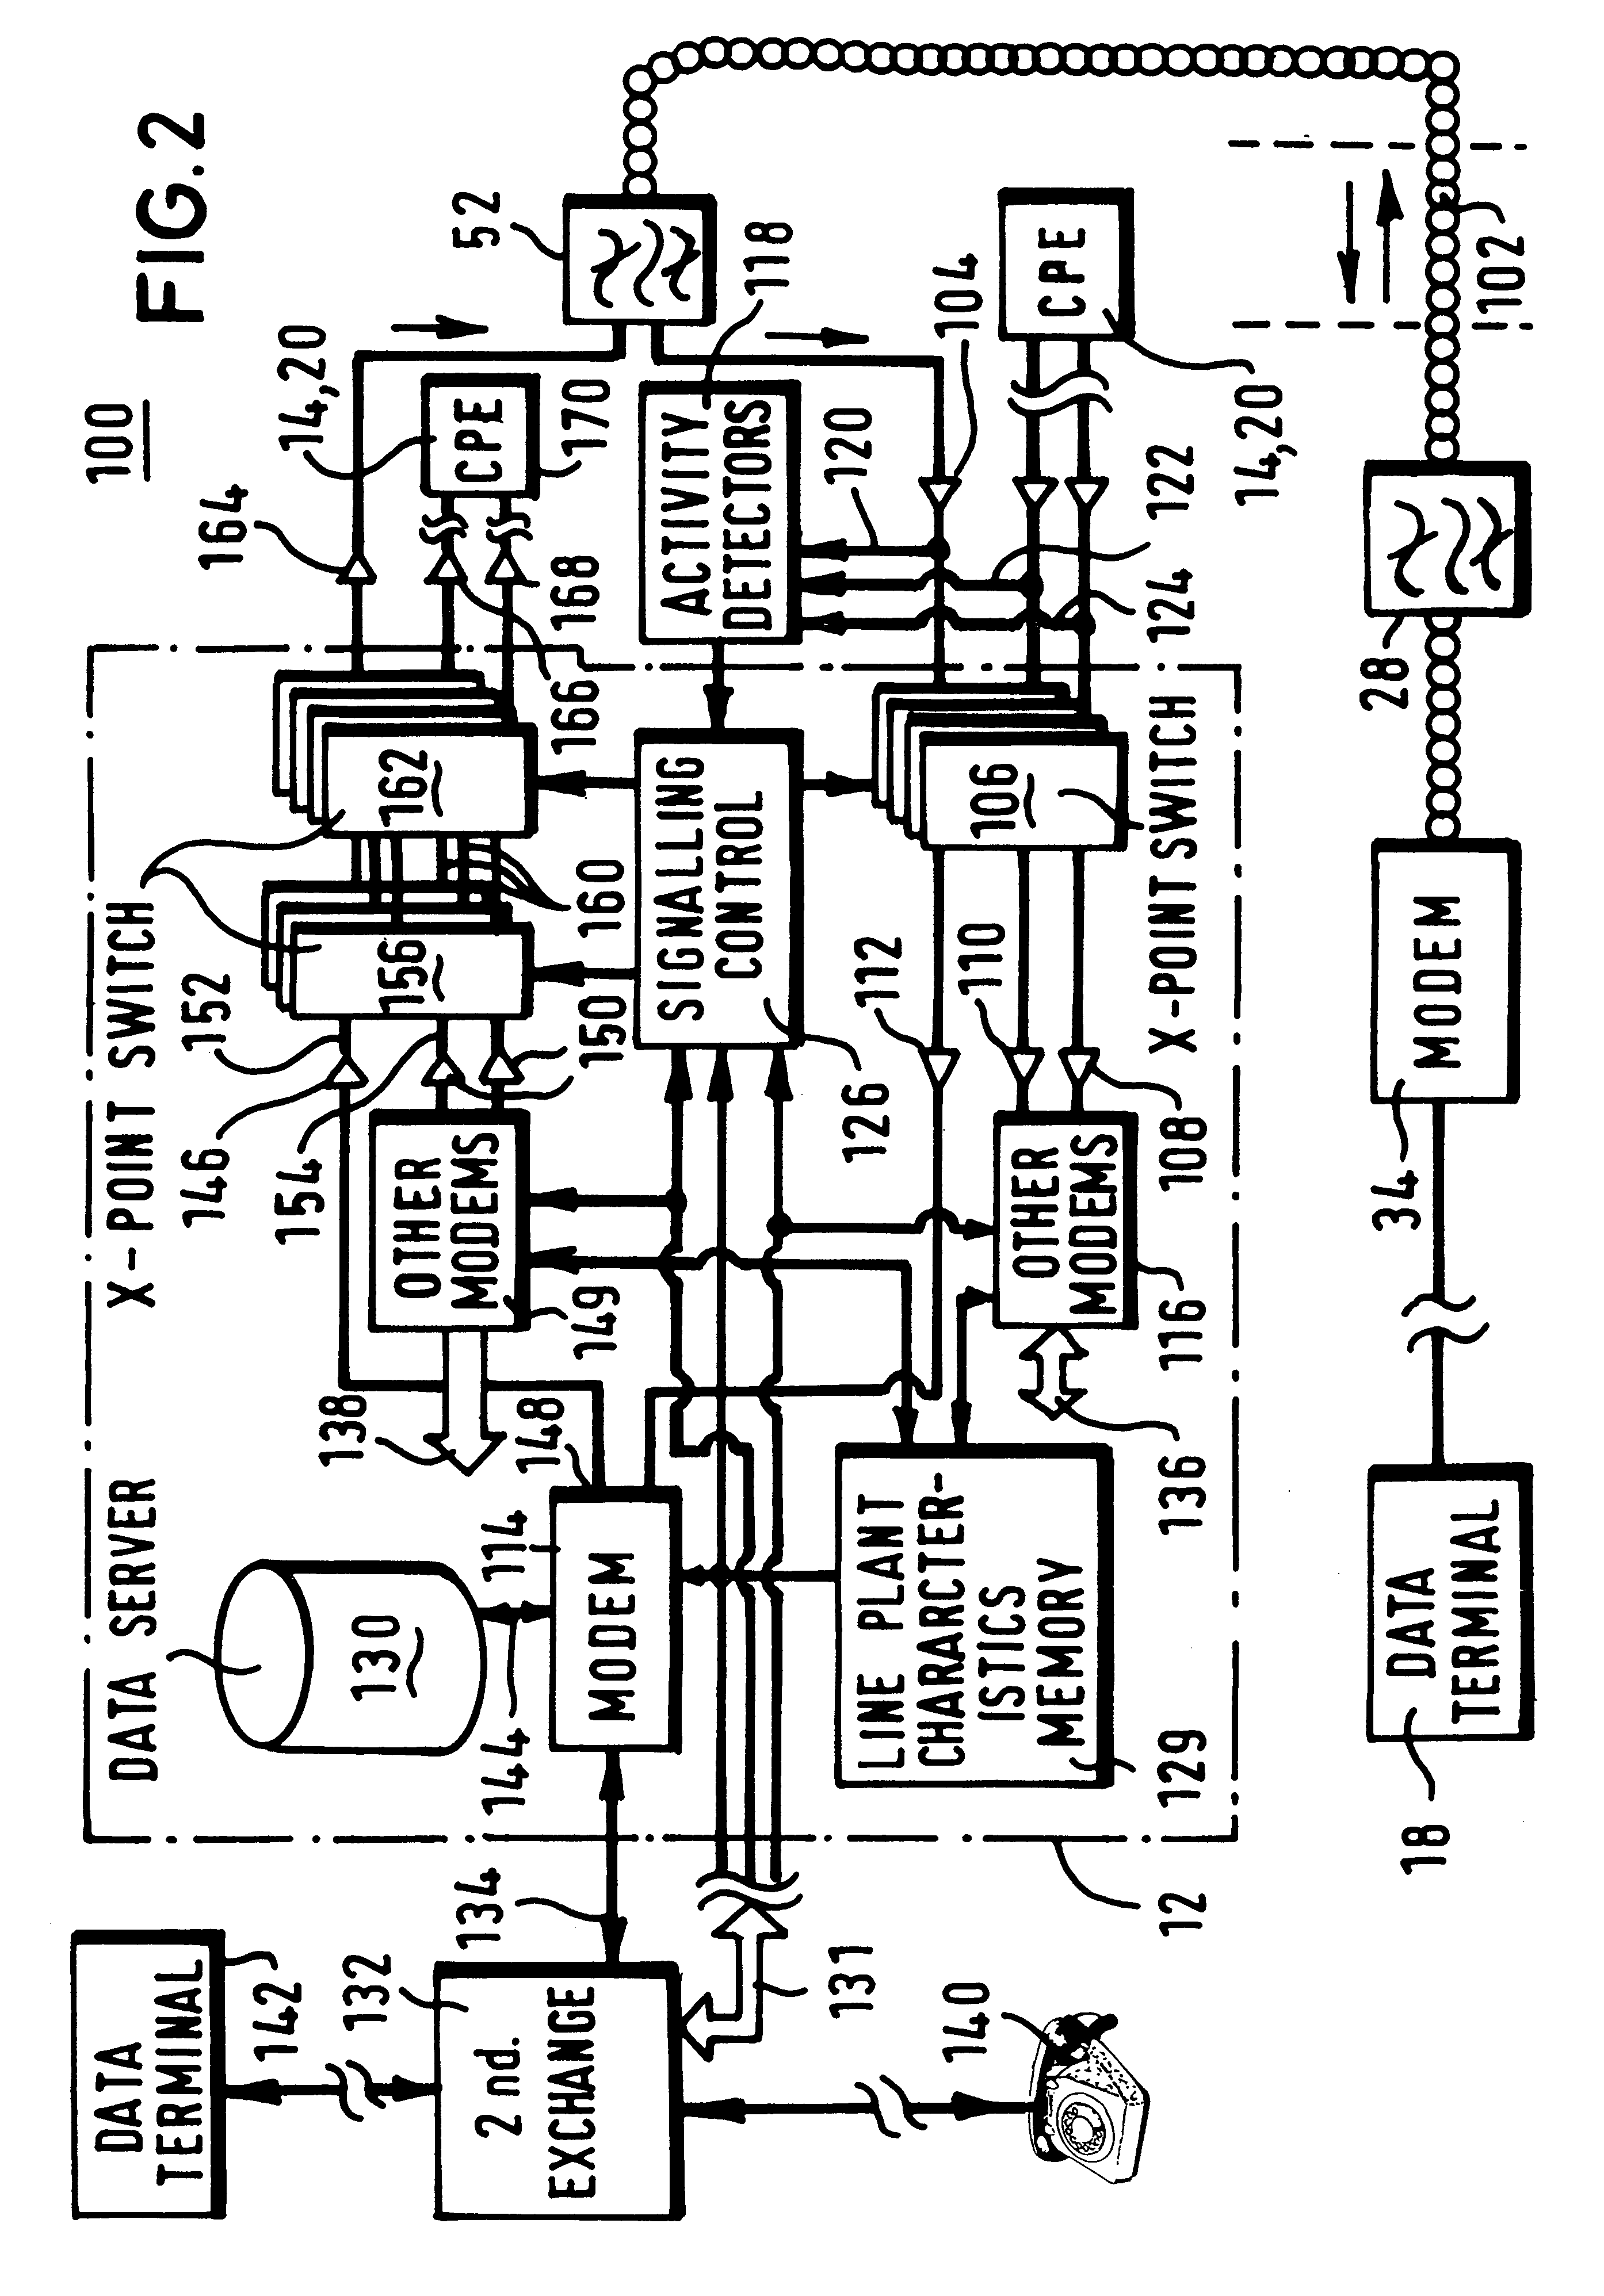 Communication system architecture, infrastructure exchange and method of operation